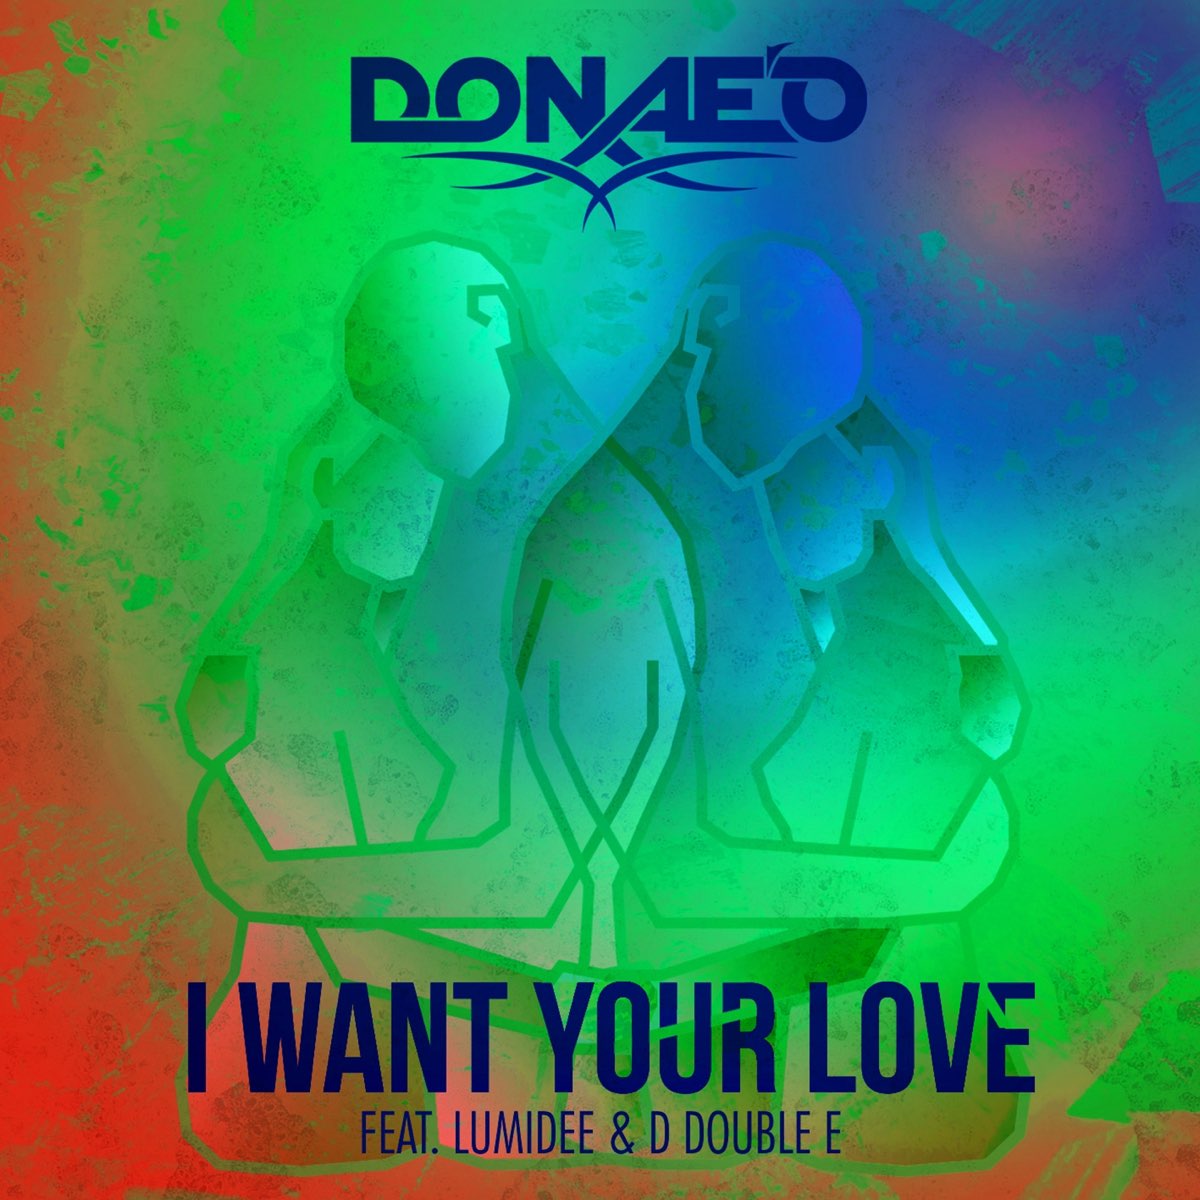 Give love remix. Want your Love. I want your Love. Топ i want your Love.